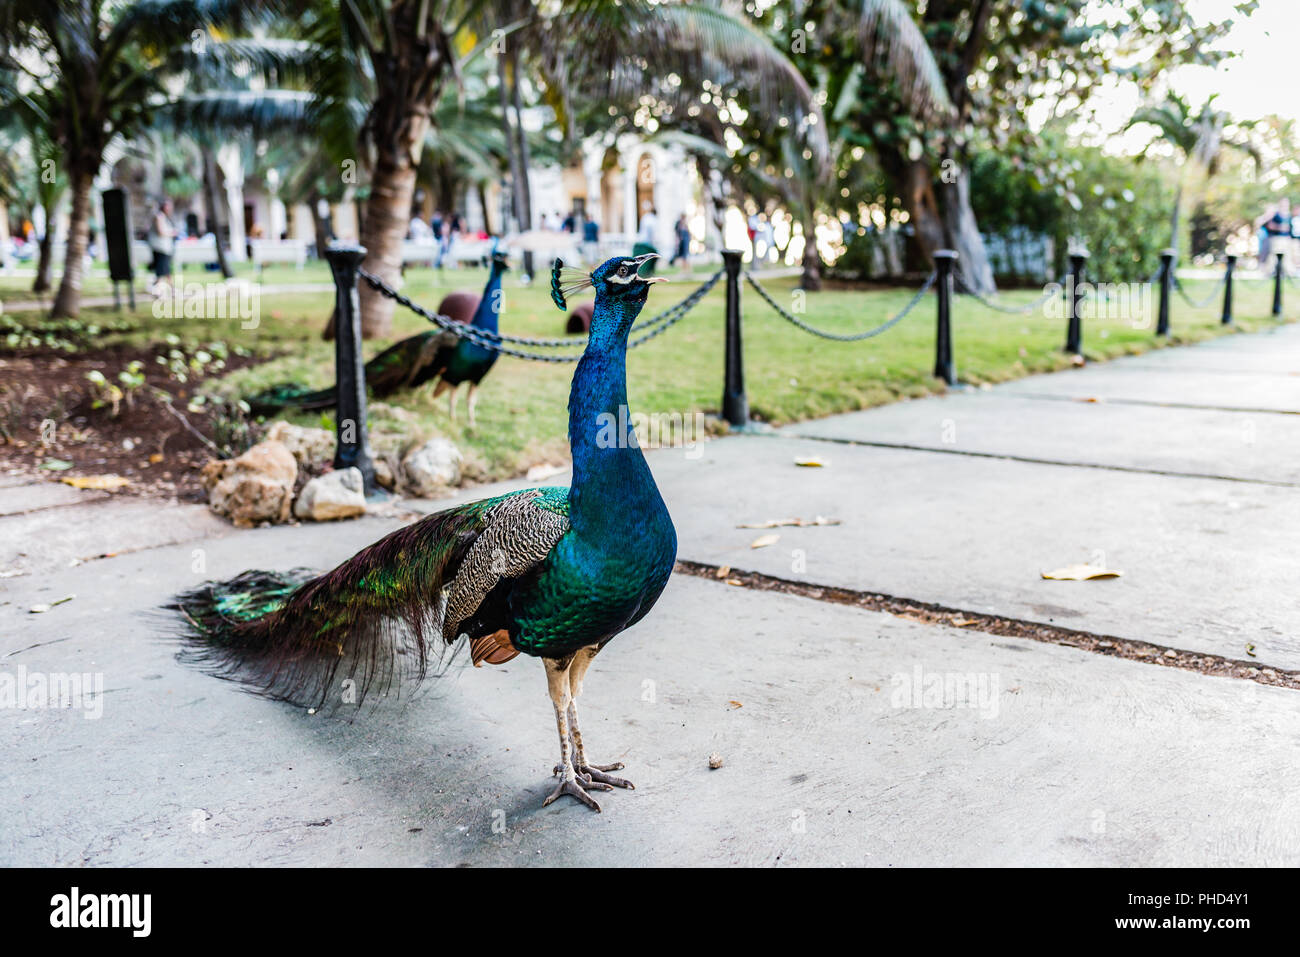 Colorful peacock hooting and crowing at sunset in Havana, Cuba. Stock Photo